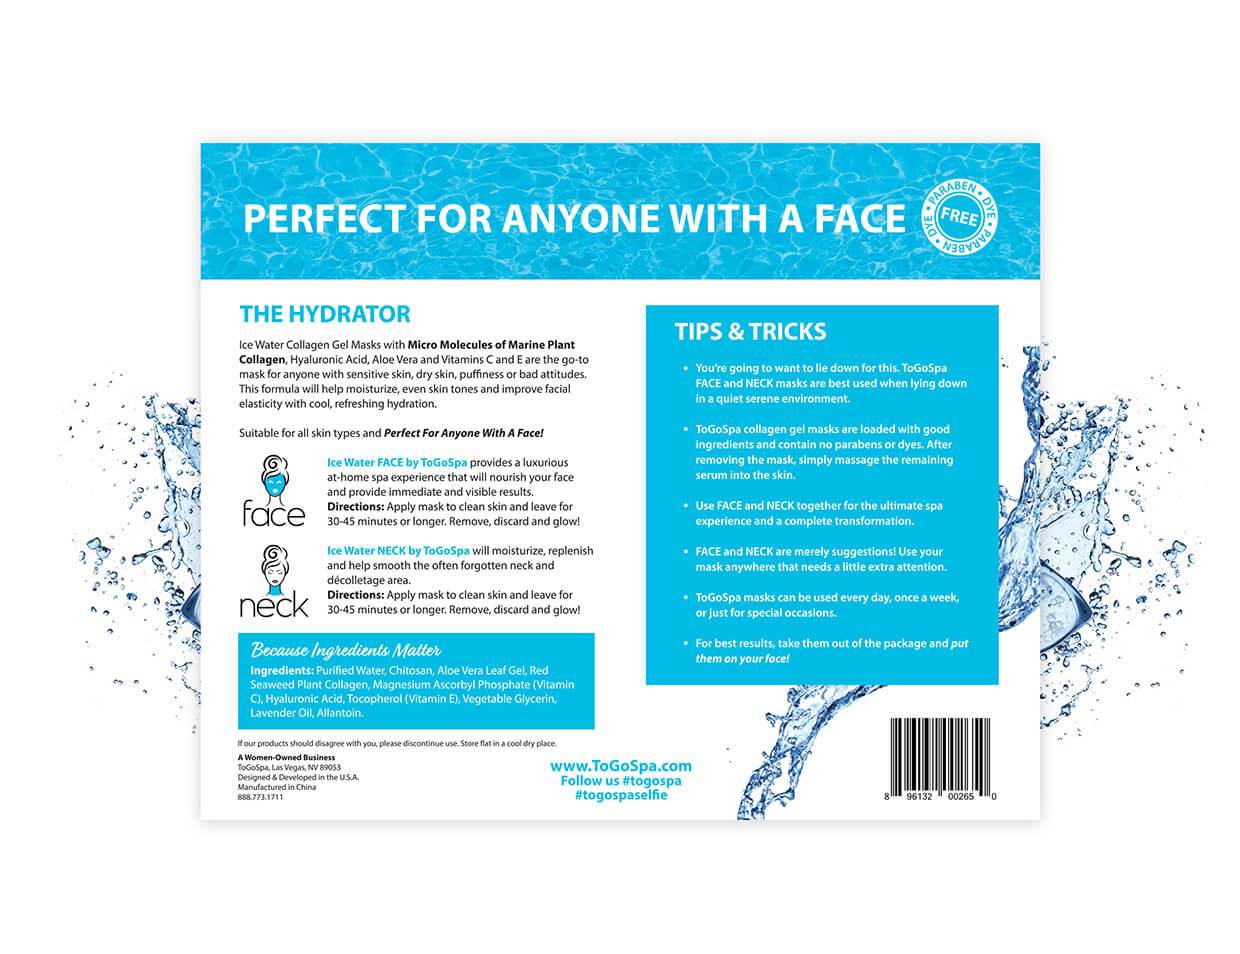 Ice Water FACE & NECK by ToGoSpa